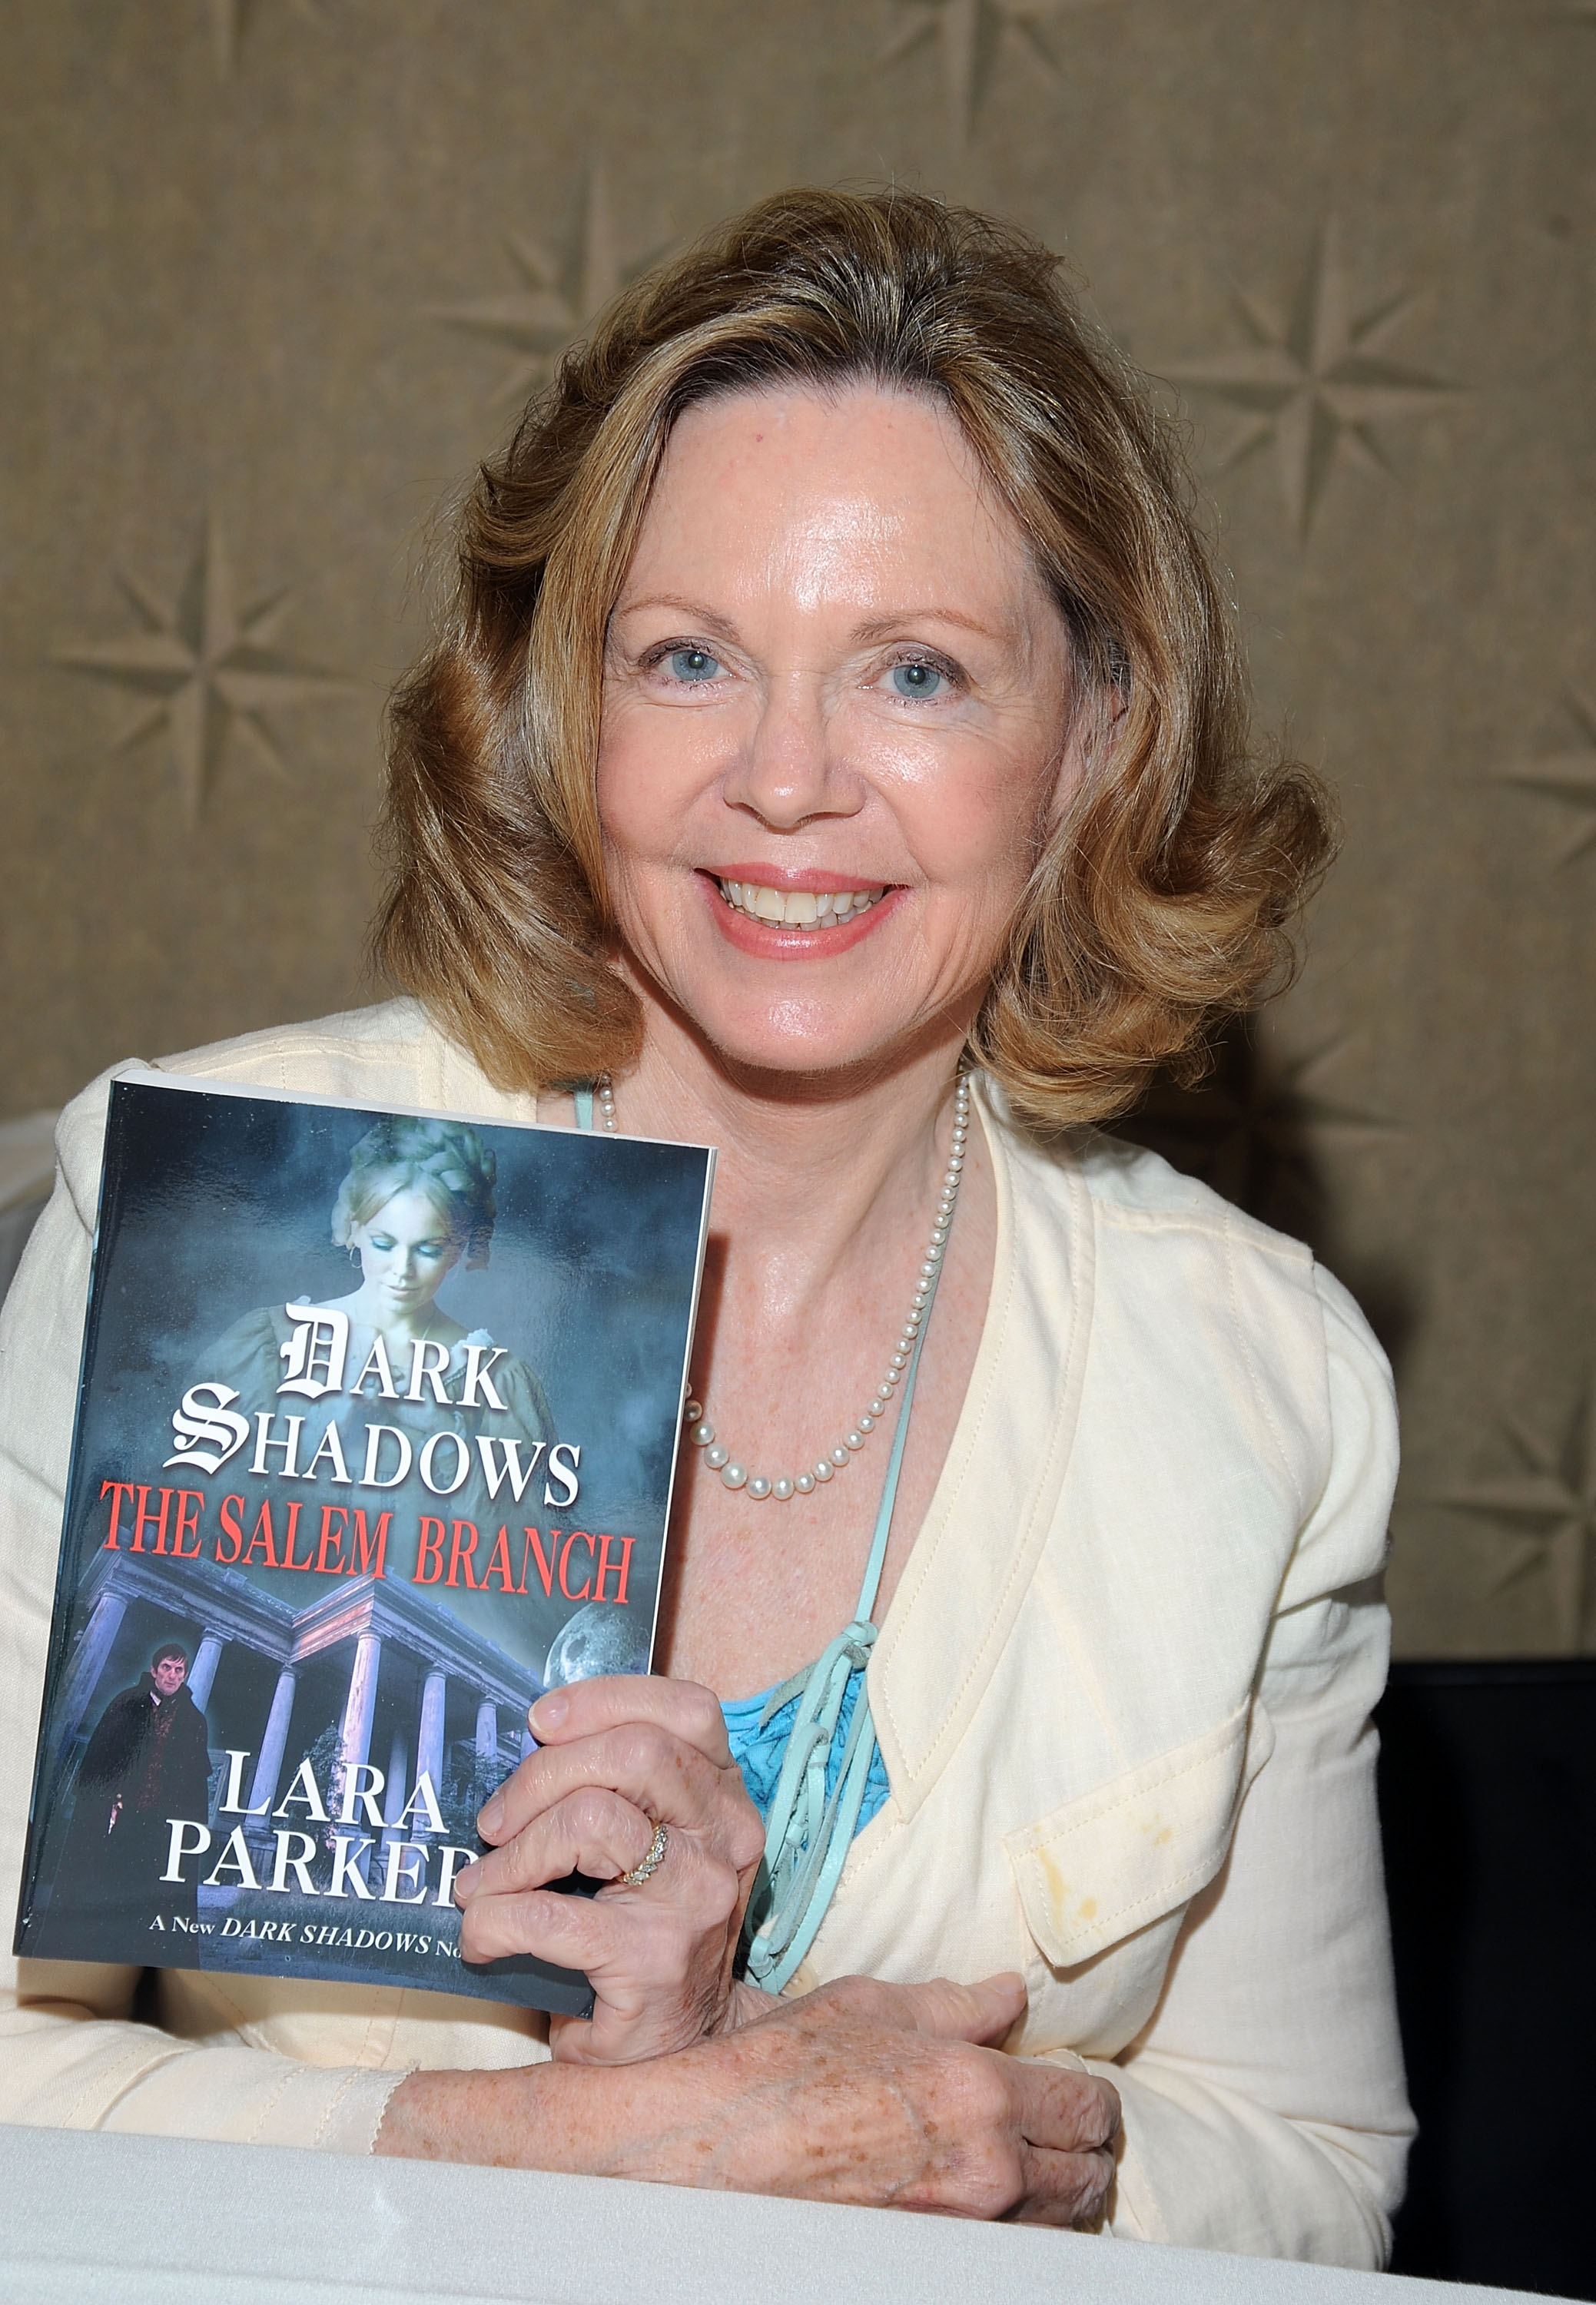 Lara Parker in Elizabeth, New Jersey on August 16, 2009 | Source: Getty Images